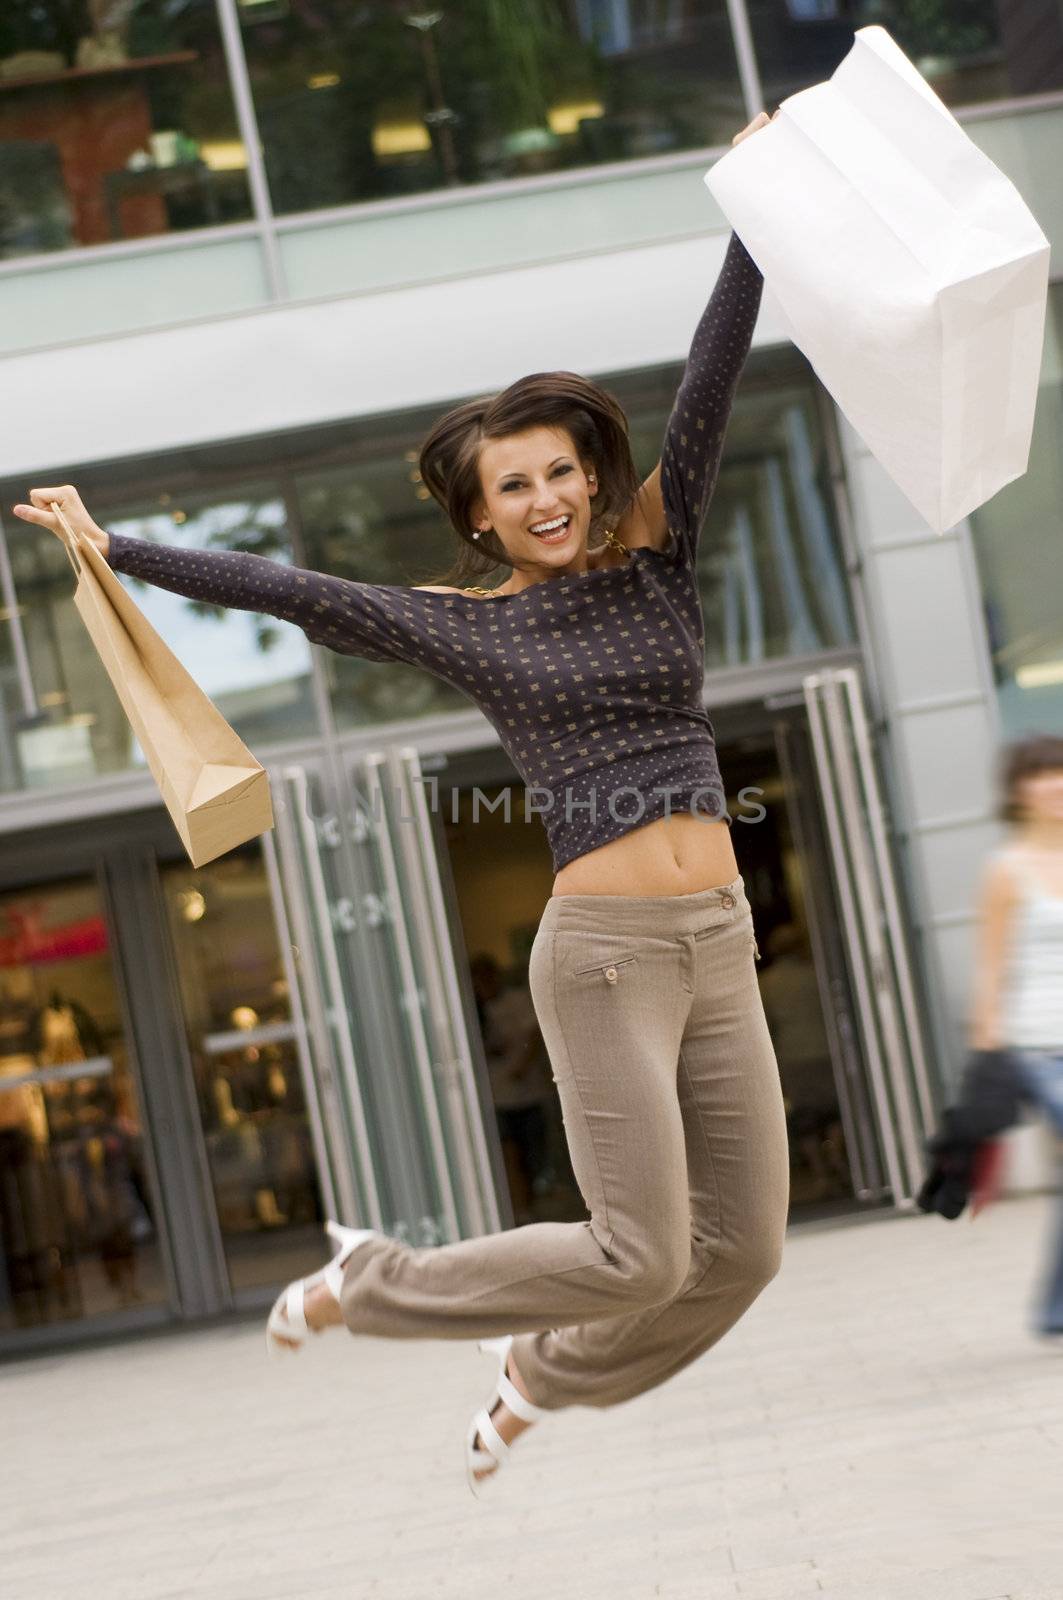 cute brunette jumping for joy in front of a commercial center after some purchases